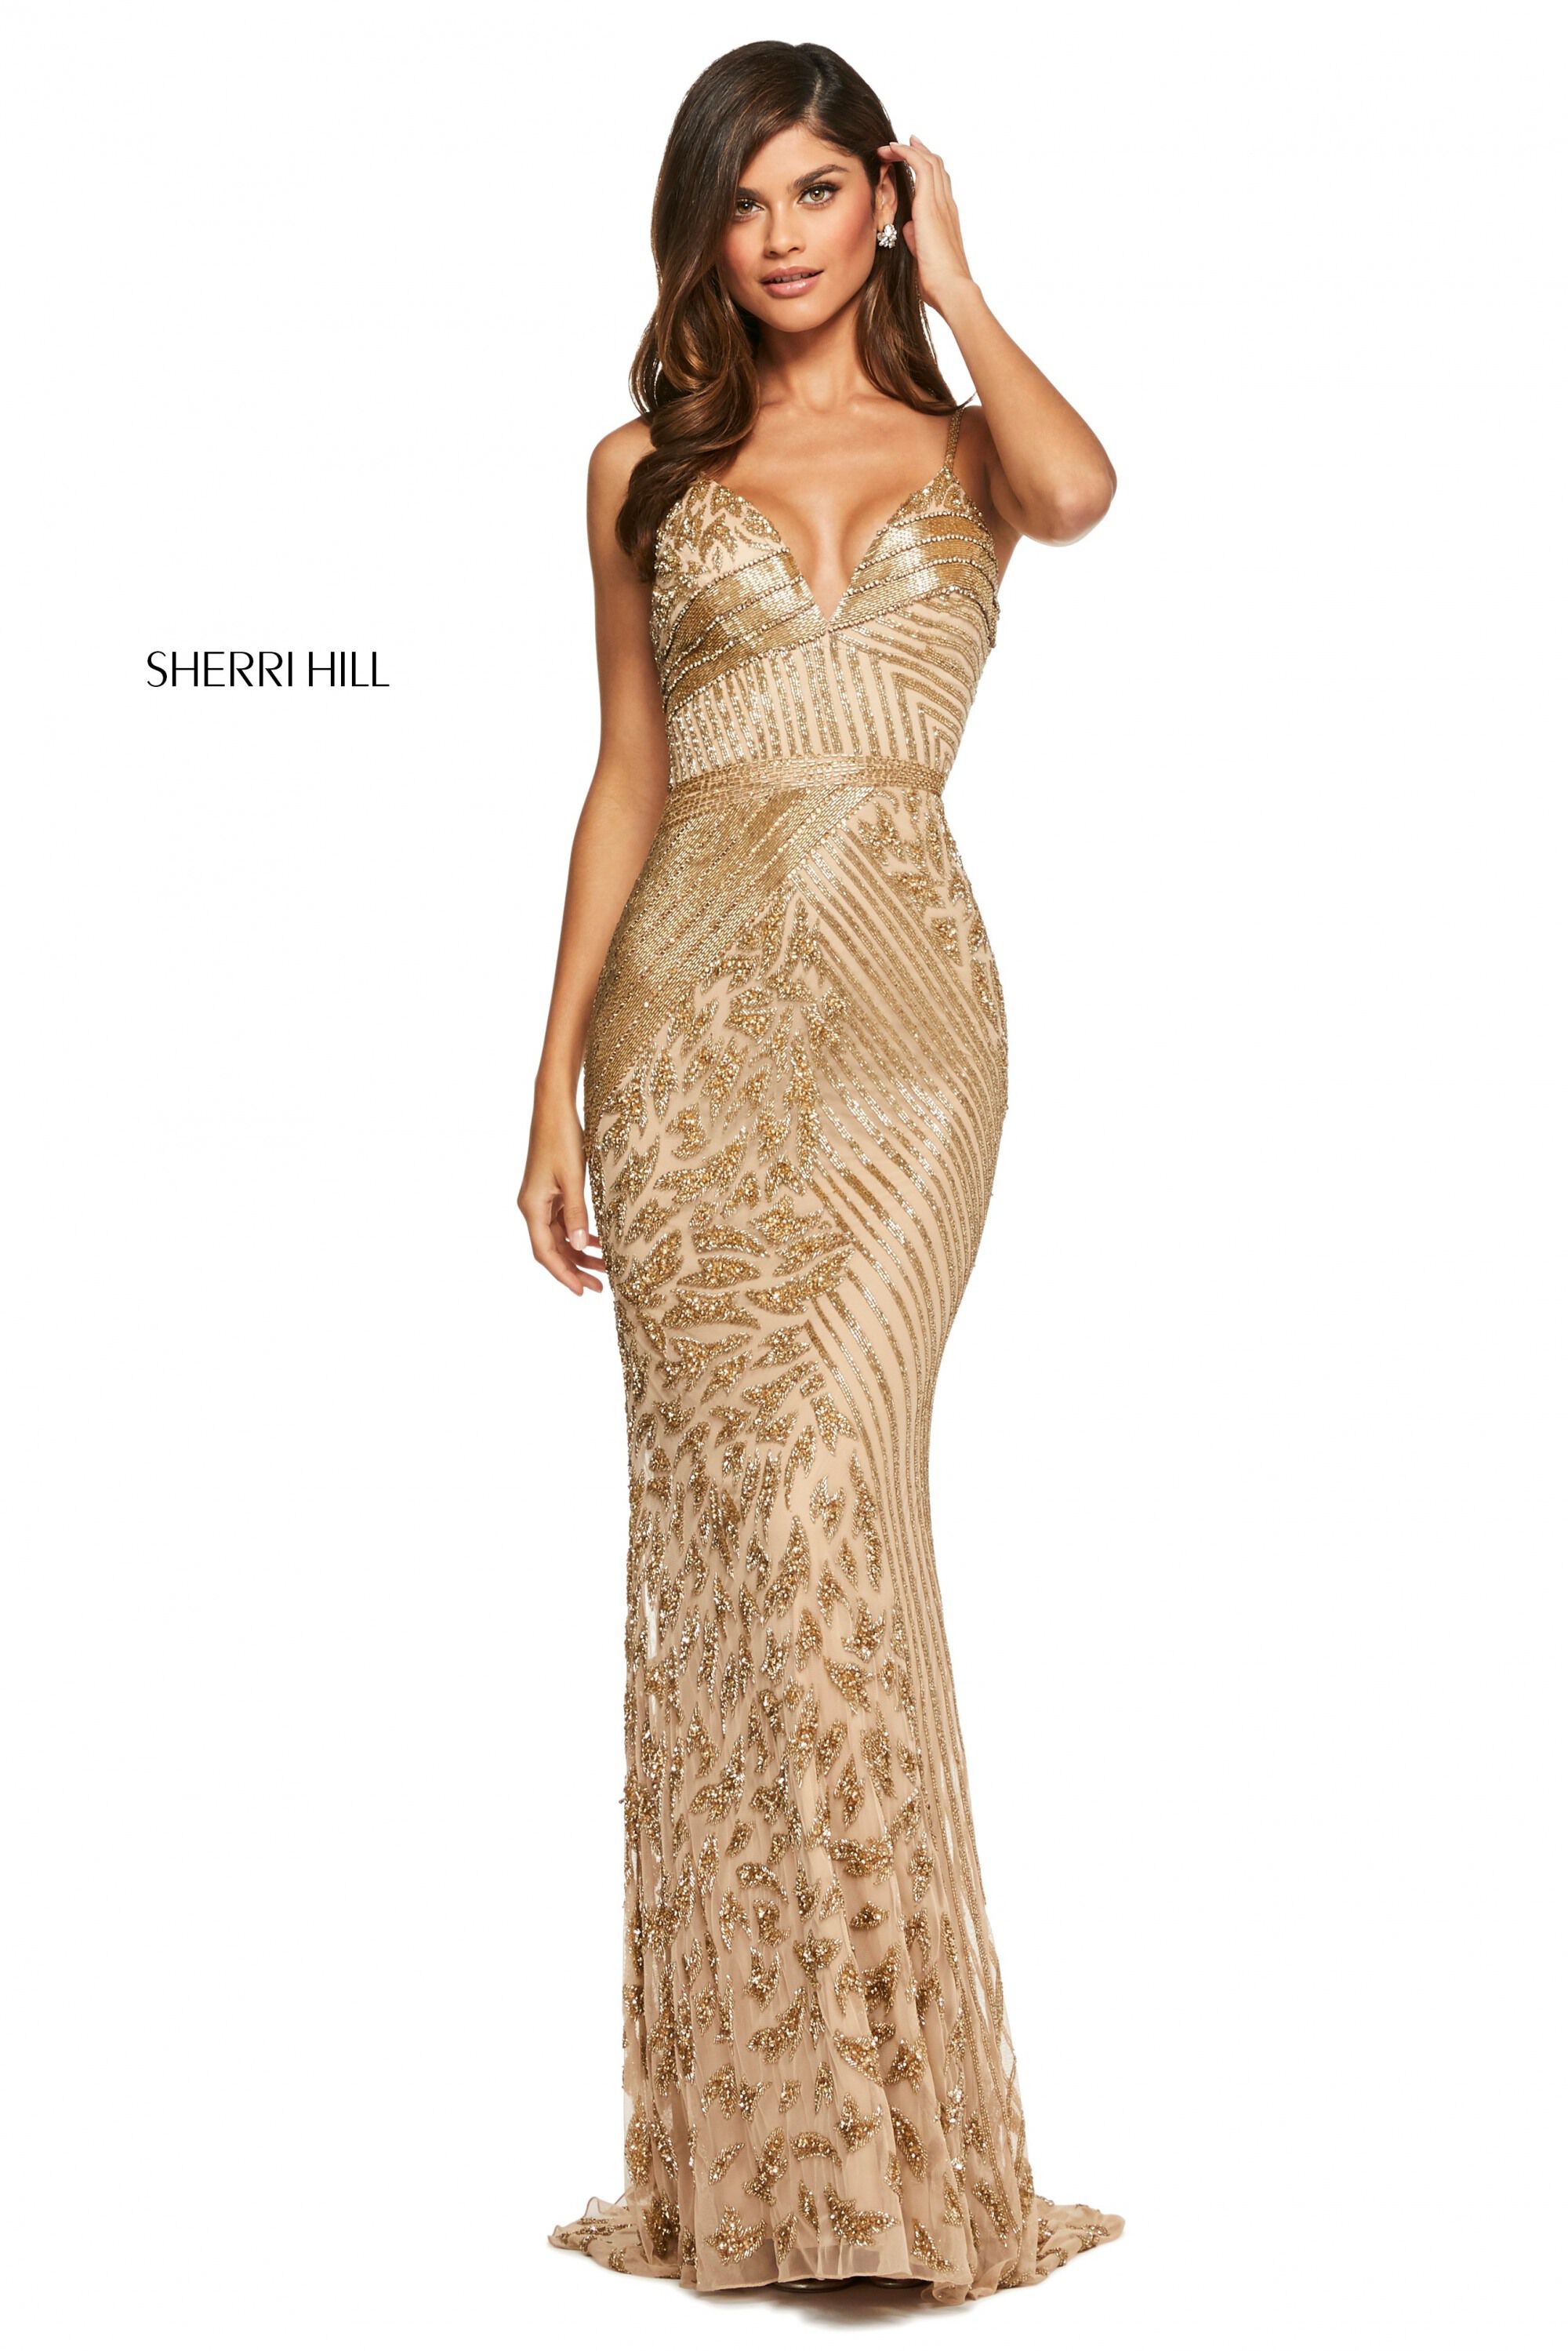 style № 53489 designed by SherriHill